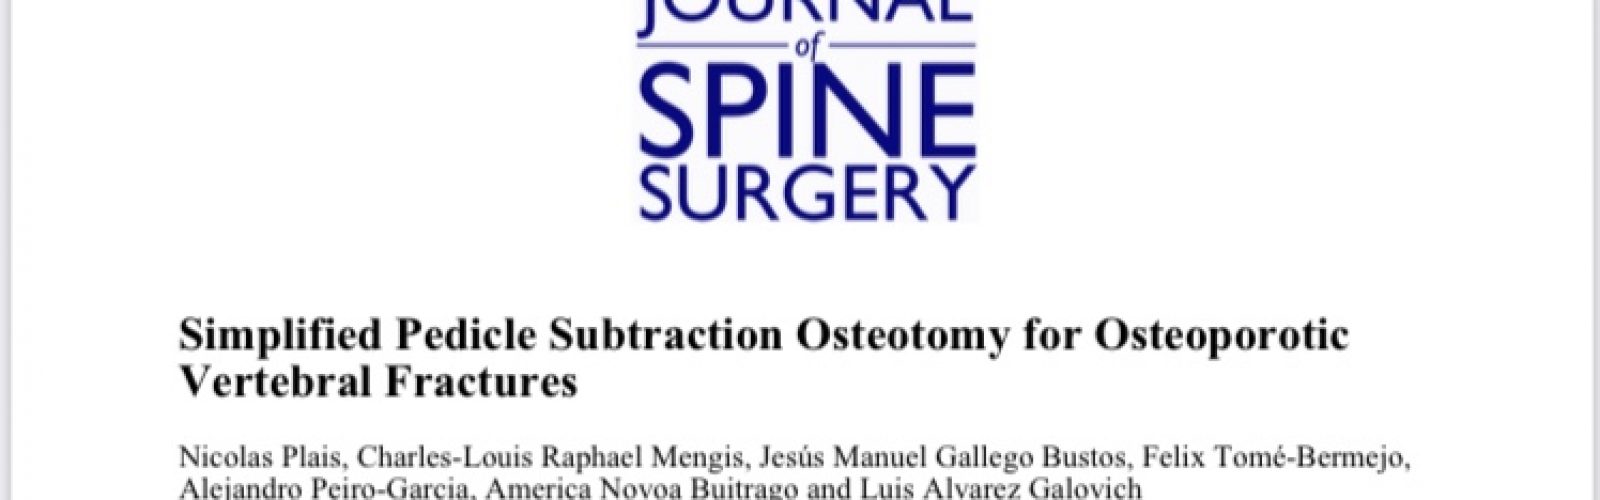 Simplified Pedicle Subtraction Osteotomy for Osteoporotic Vertebral Fractures